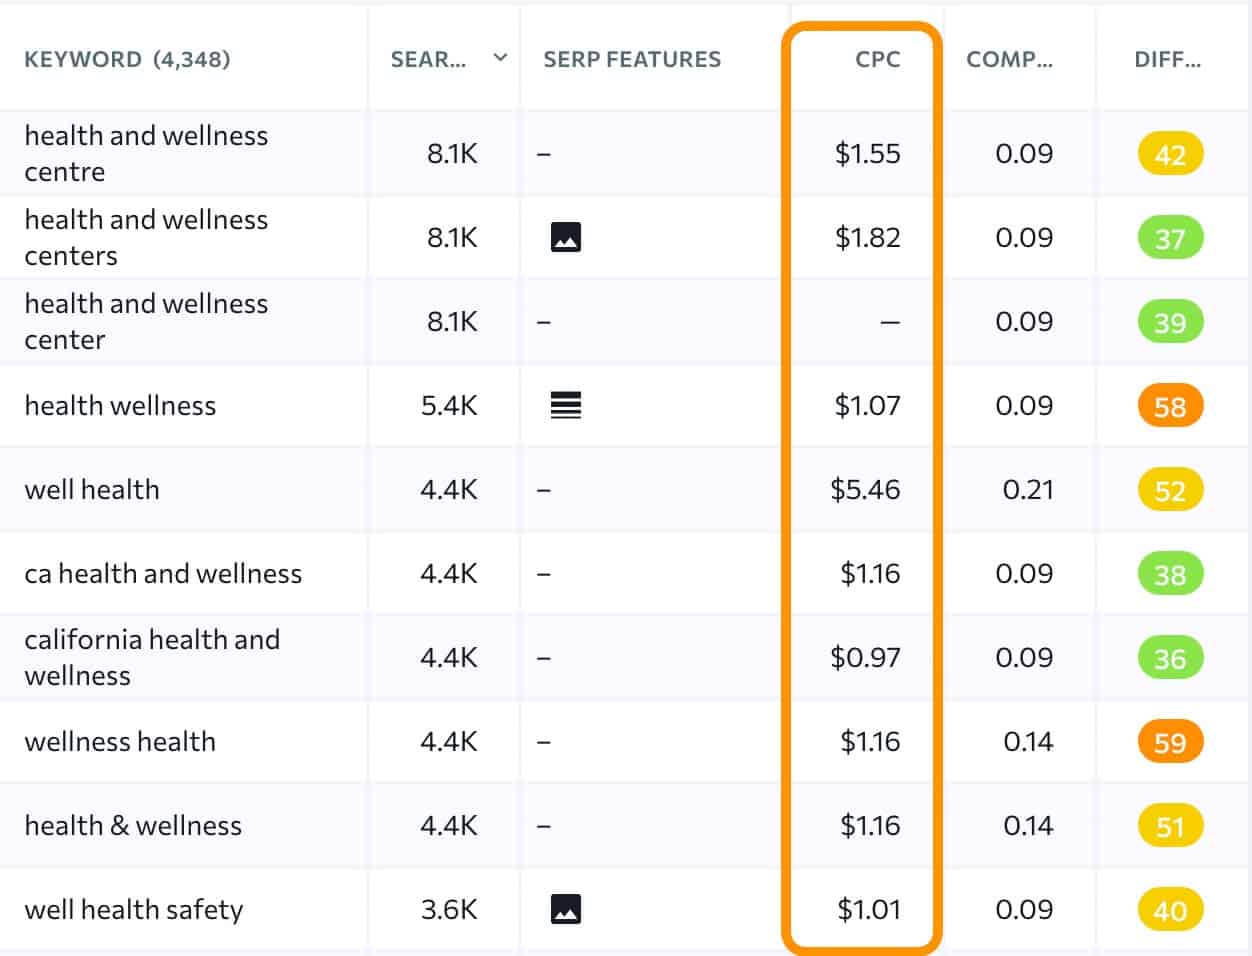 Top Paying Keywords For The Health And Wellness Niche